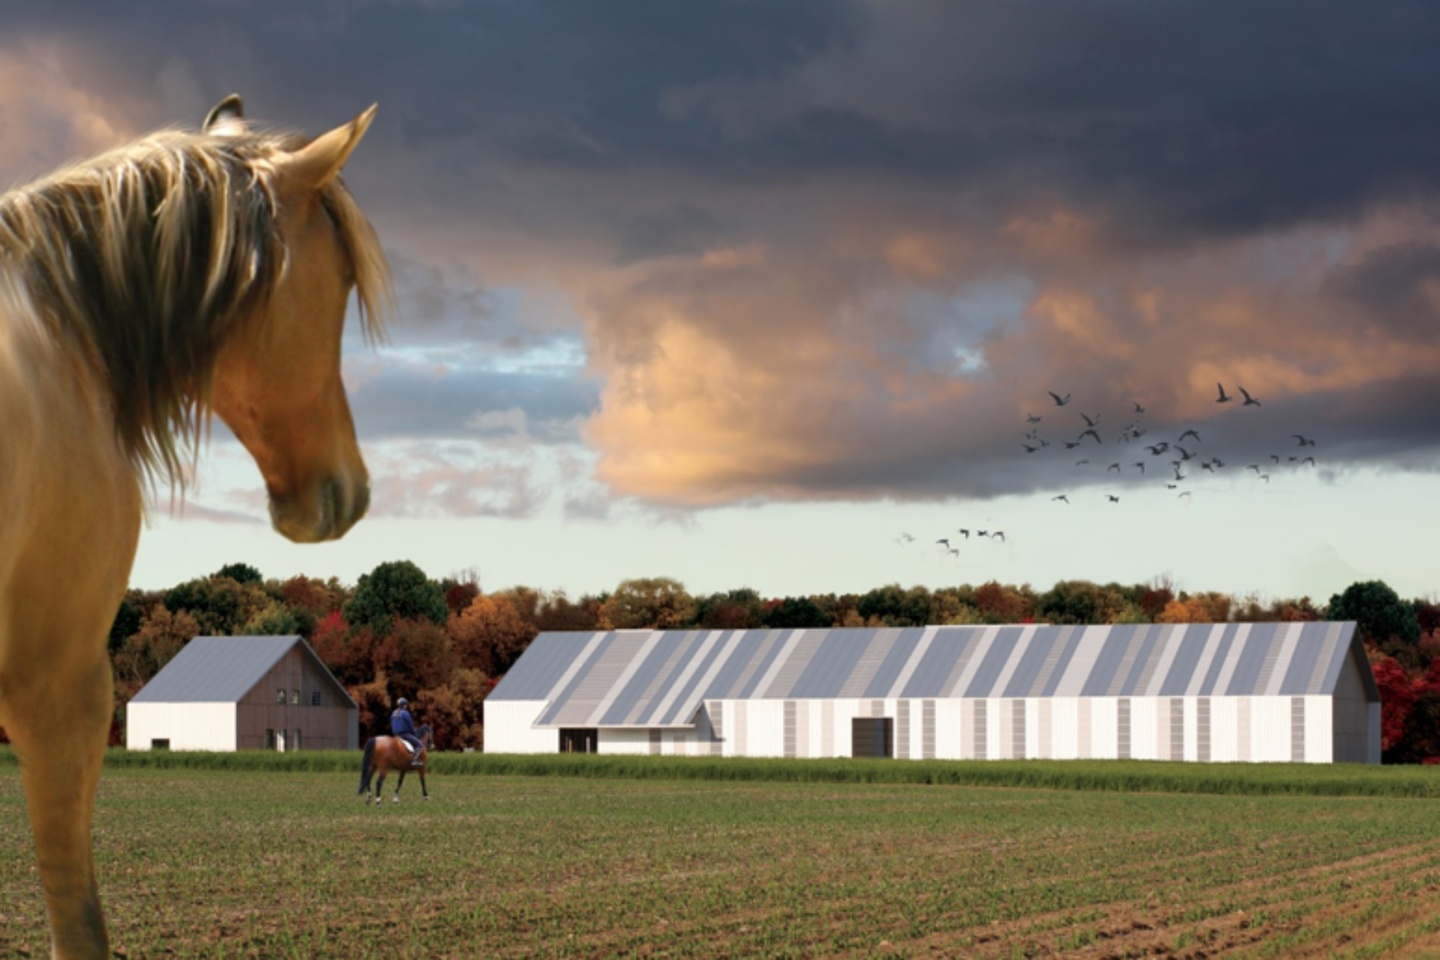 A horse looks across an agricultural field at a long white barn structure with vertical stripes of grey and beige.